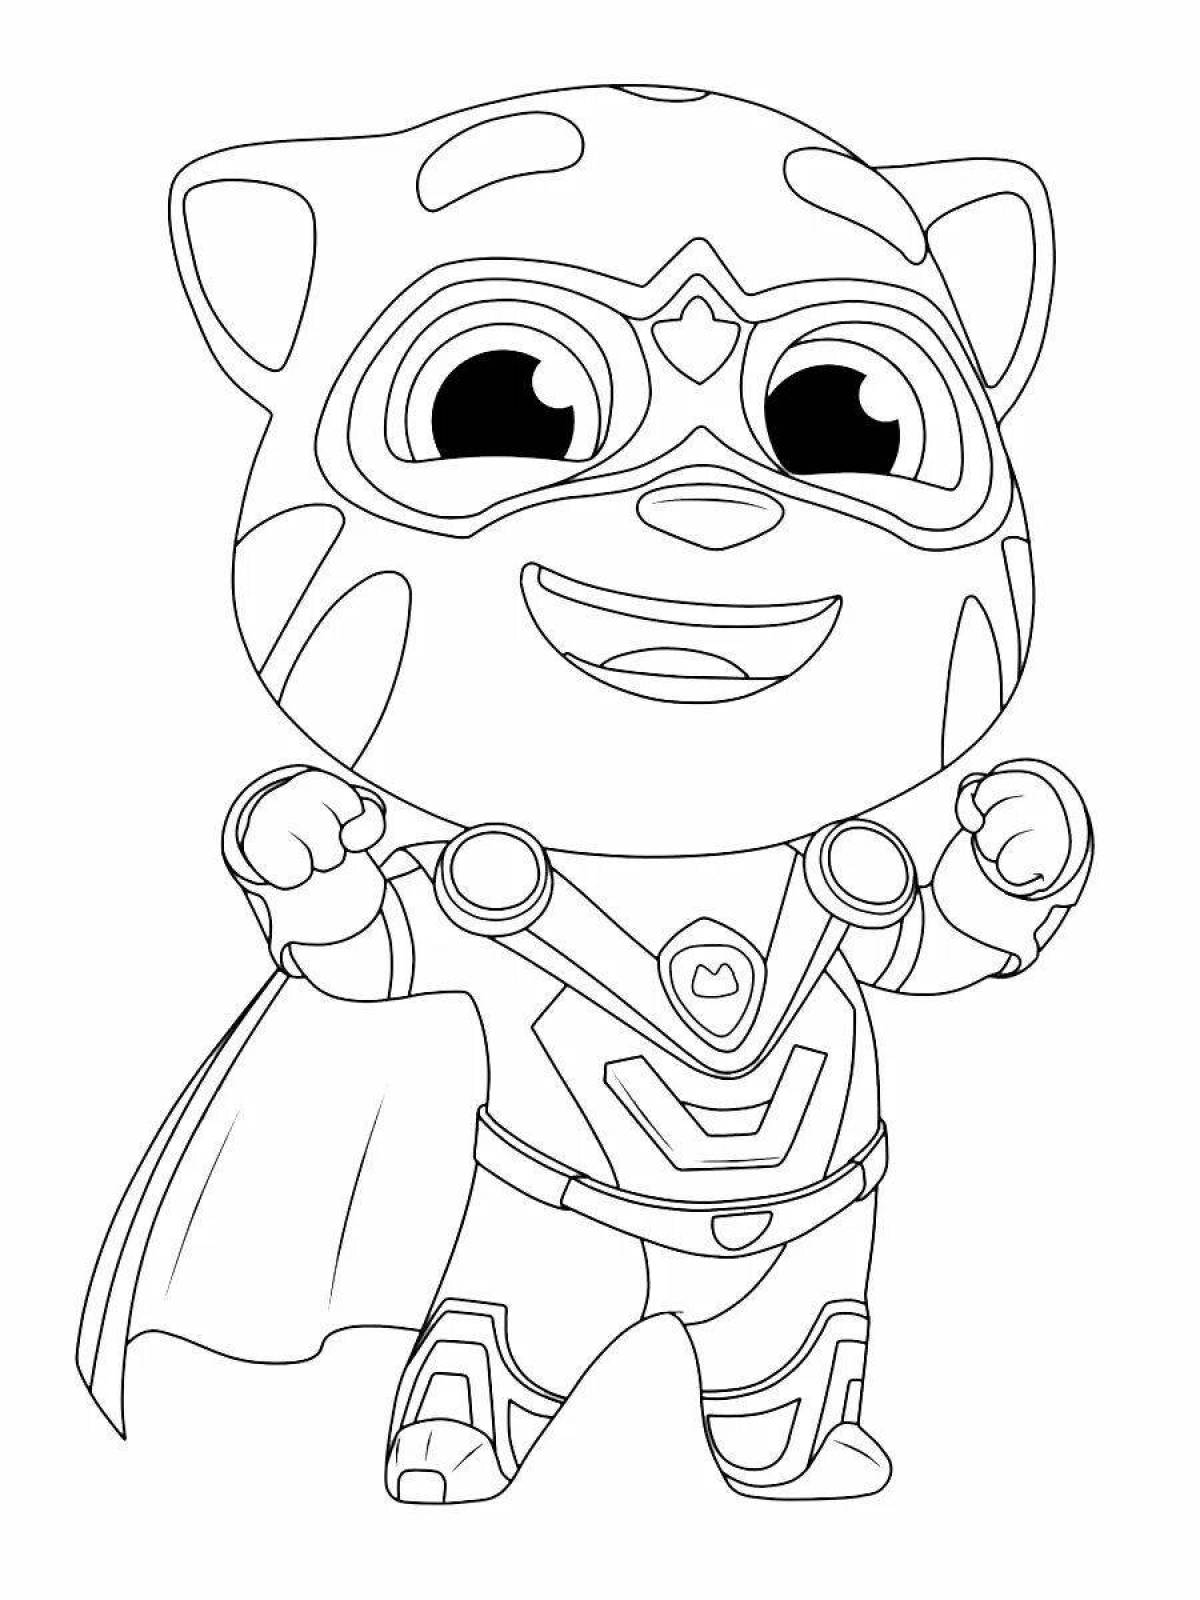 Tom chase's animated coloring page